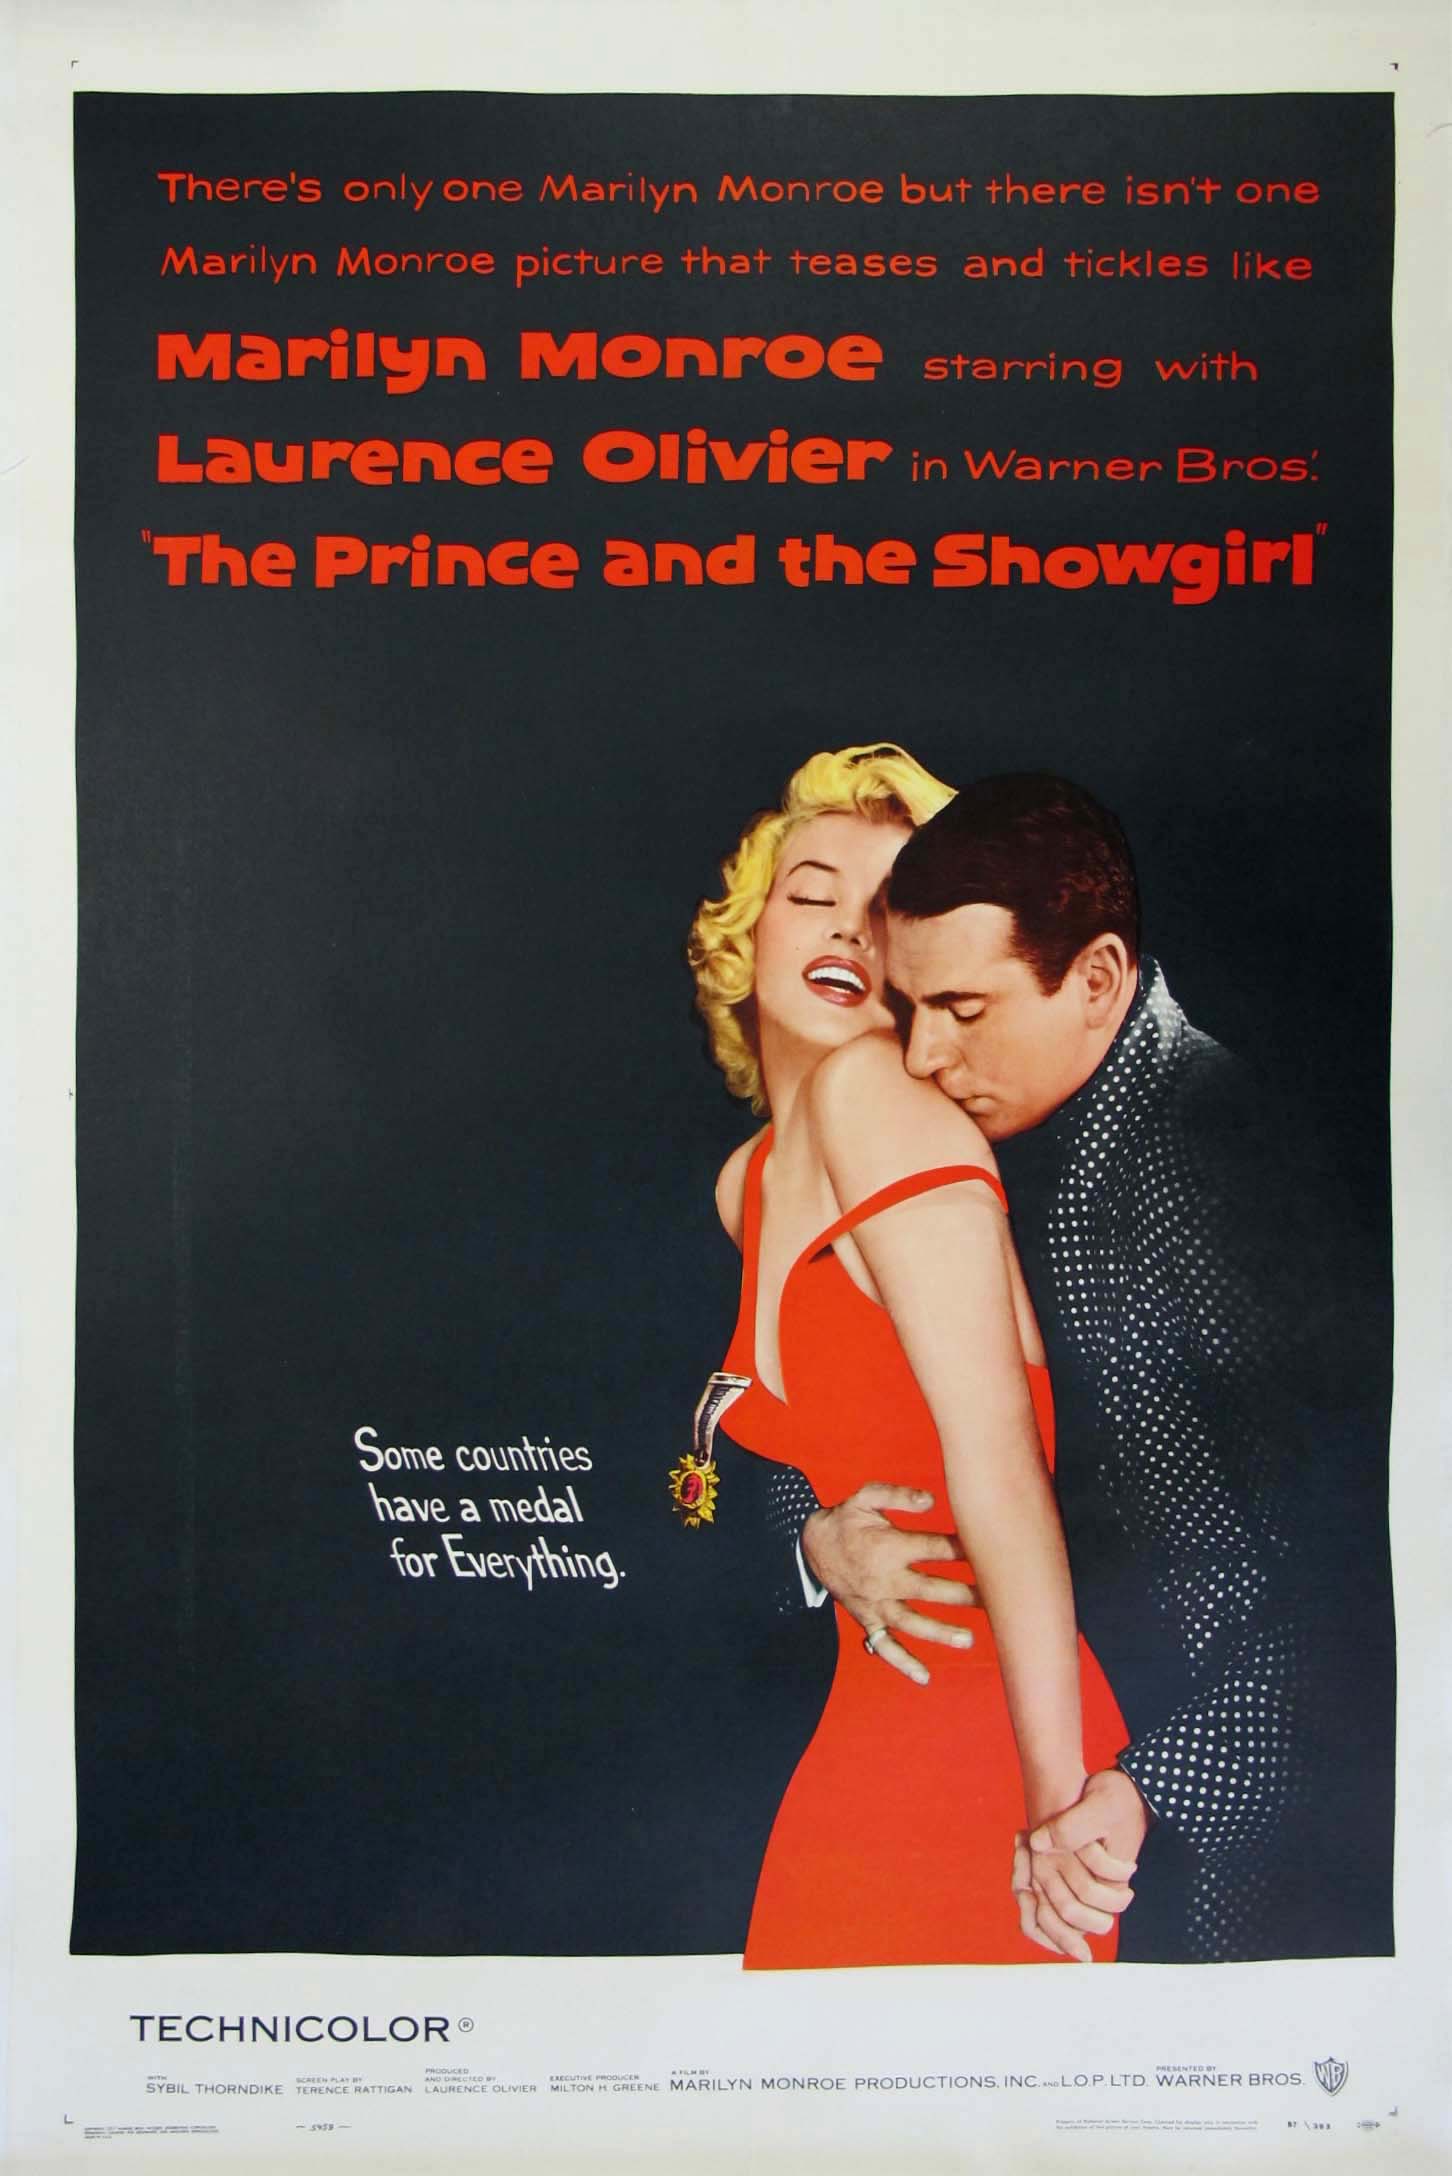 The Prince and the Showgirl